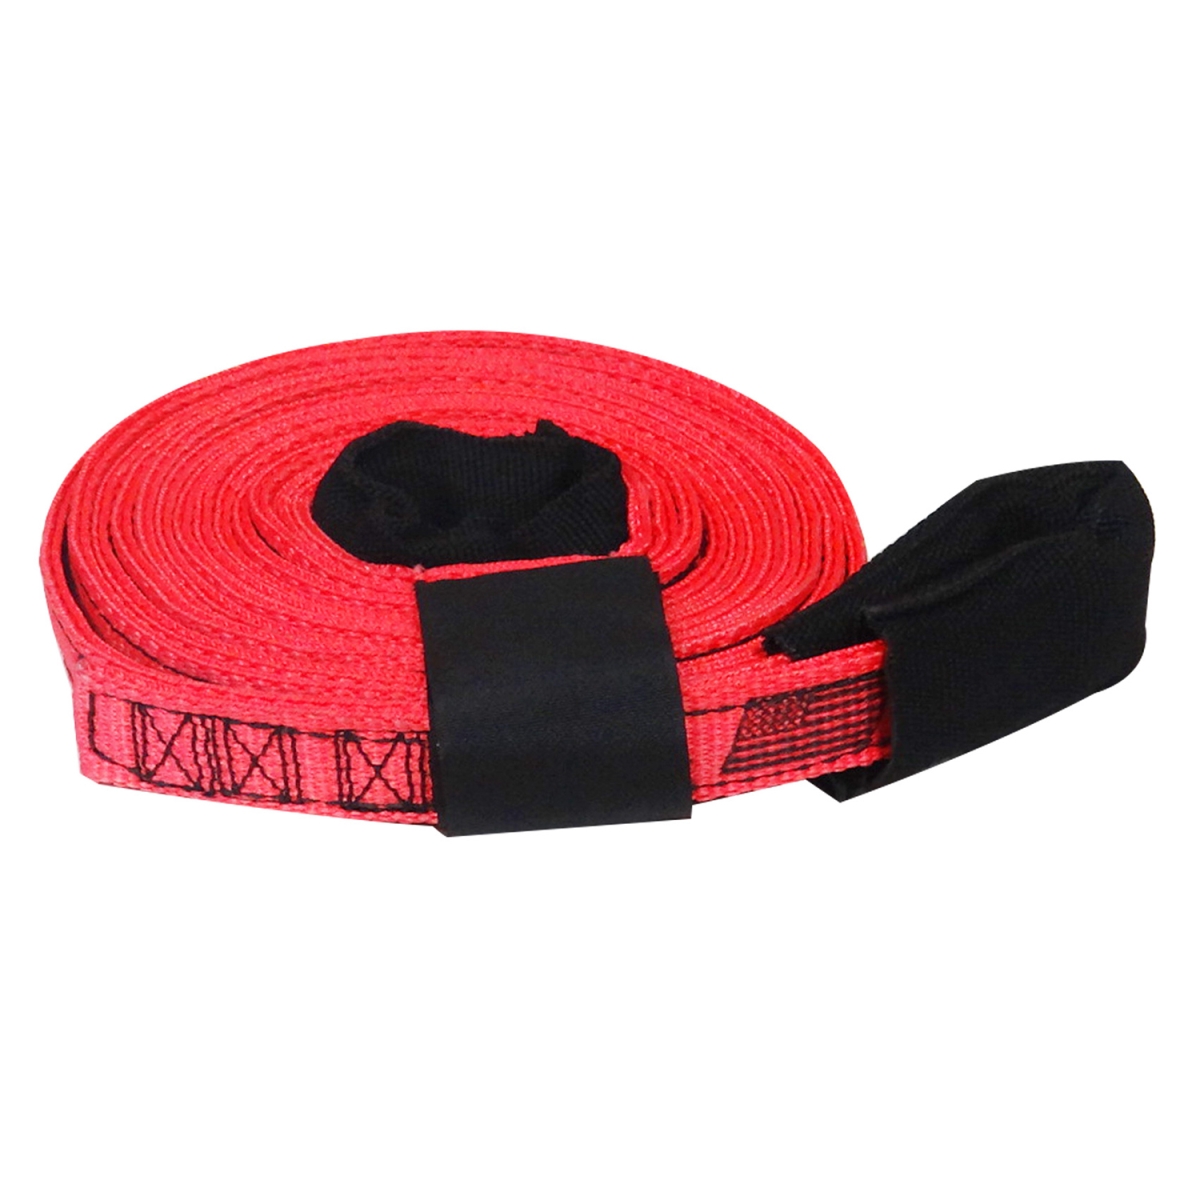 Sltt115k07r 1 In. X 15 Ft. Tow & Lifting Strap With Hook & Loop Storage Fastener, 7000 Lbs